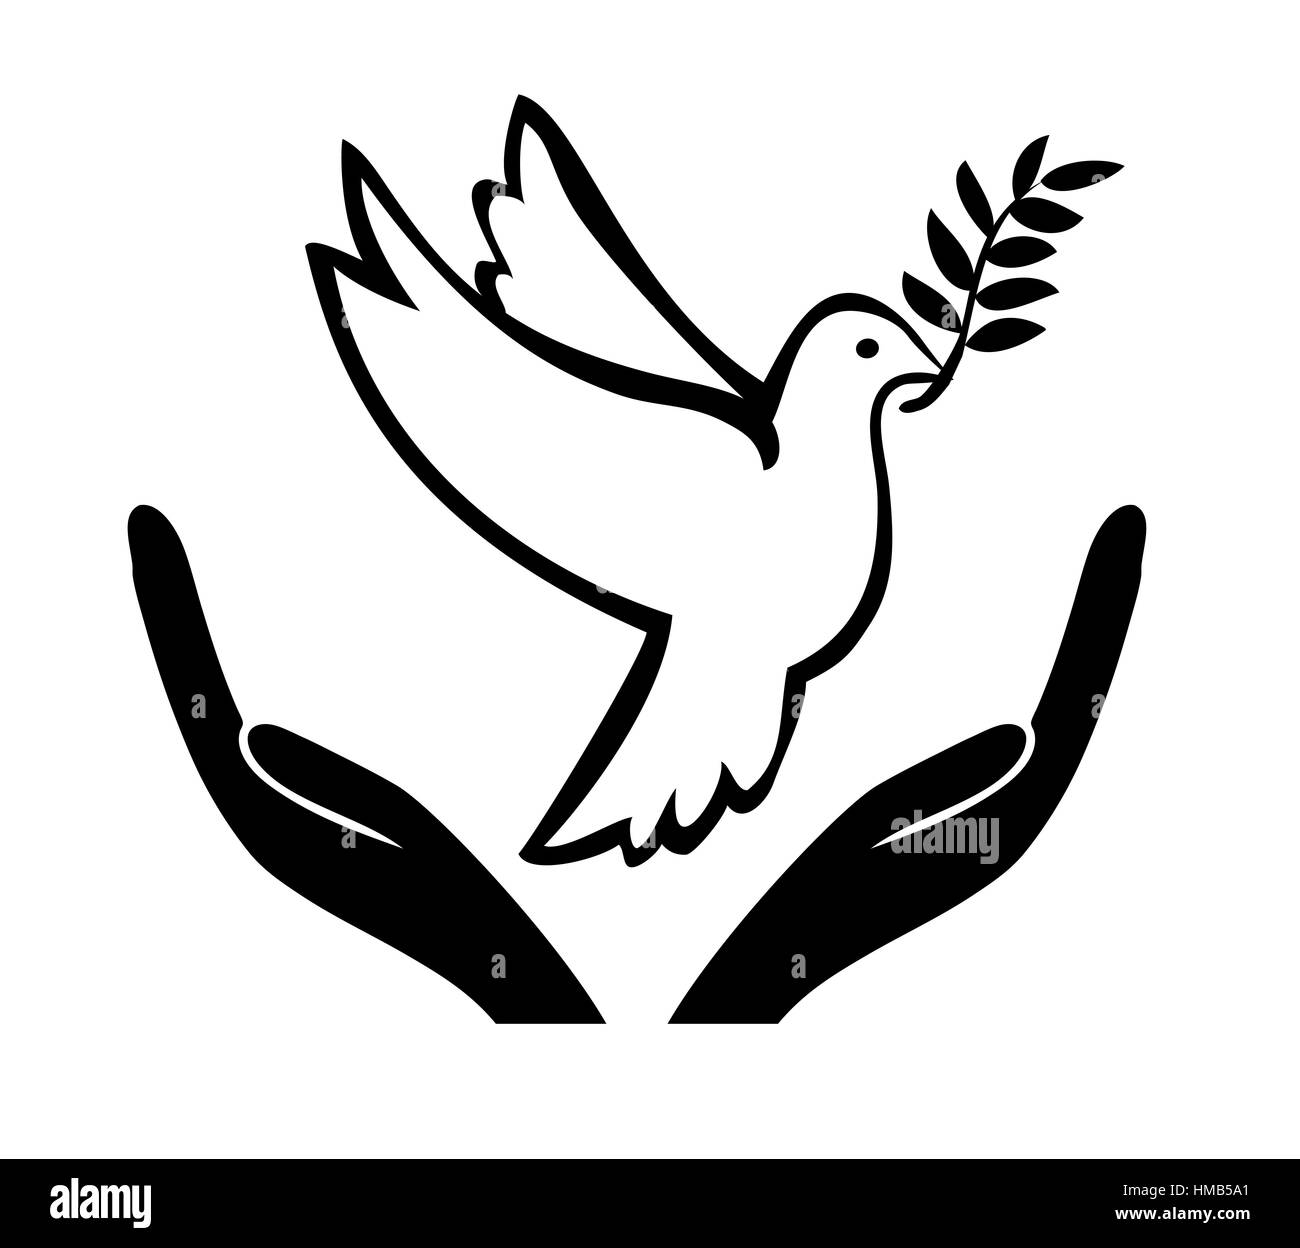 Symbol and appeal to achieve a peaceful solution Stock Photo